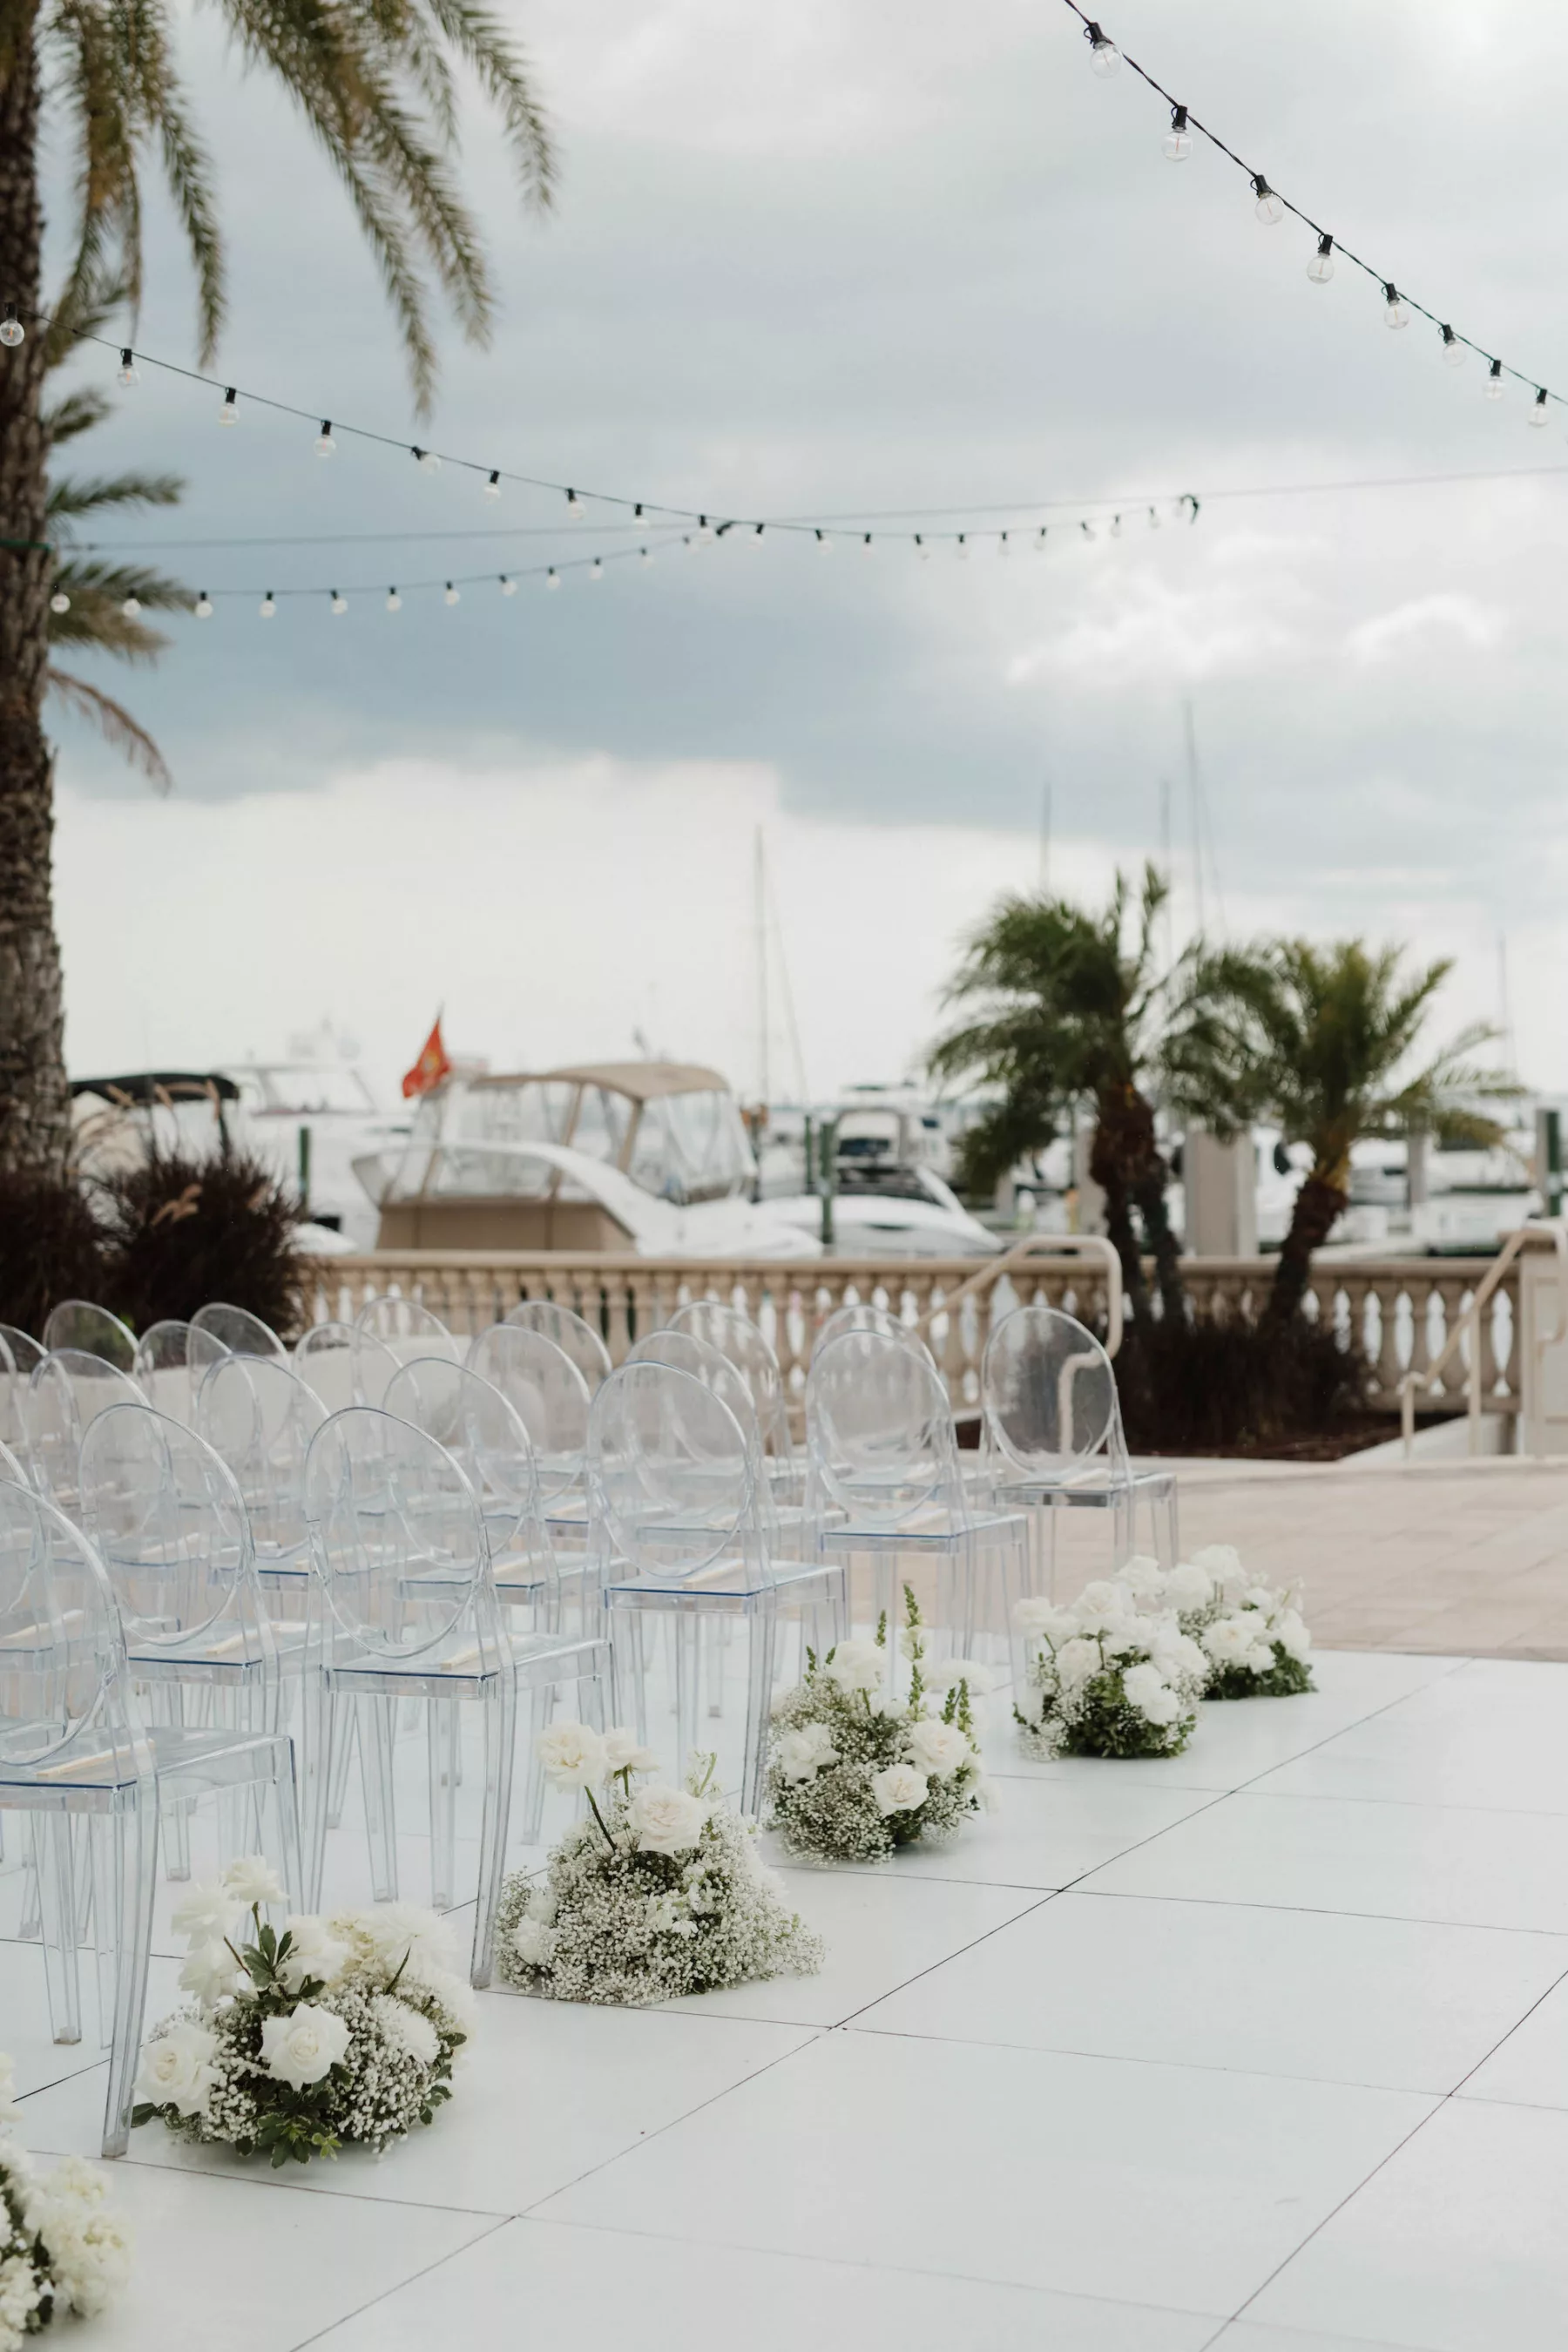 Timeless Monochromatic Outdoor Oceanview Wedding Ceremony Decor Inspiration | Acrylic Ghost Chairs | White Rose and Baby's Breath Aisle Flower Arrangement Ideas | Tampa Bay Event Venue Westshore Yacht Club | Kate Ryan Event Rentals